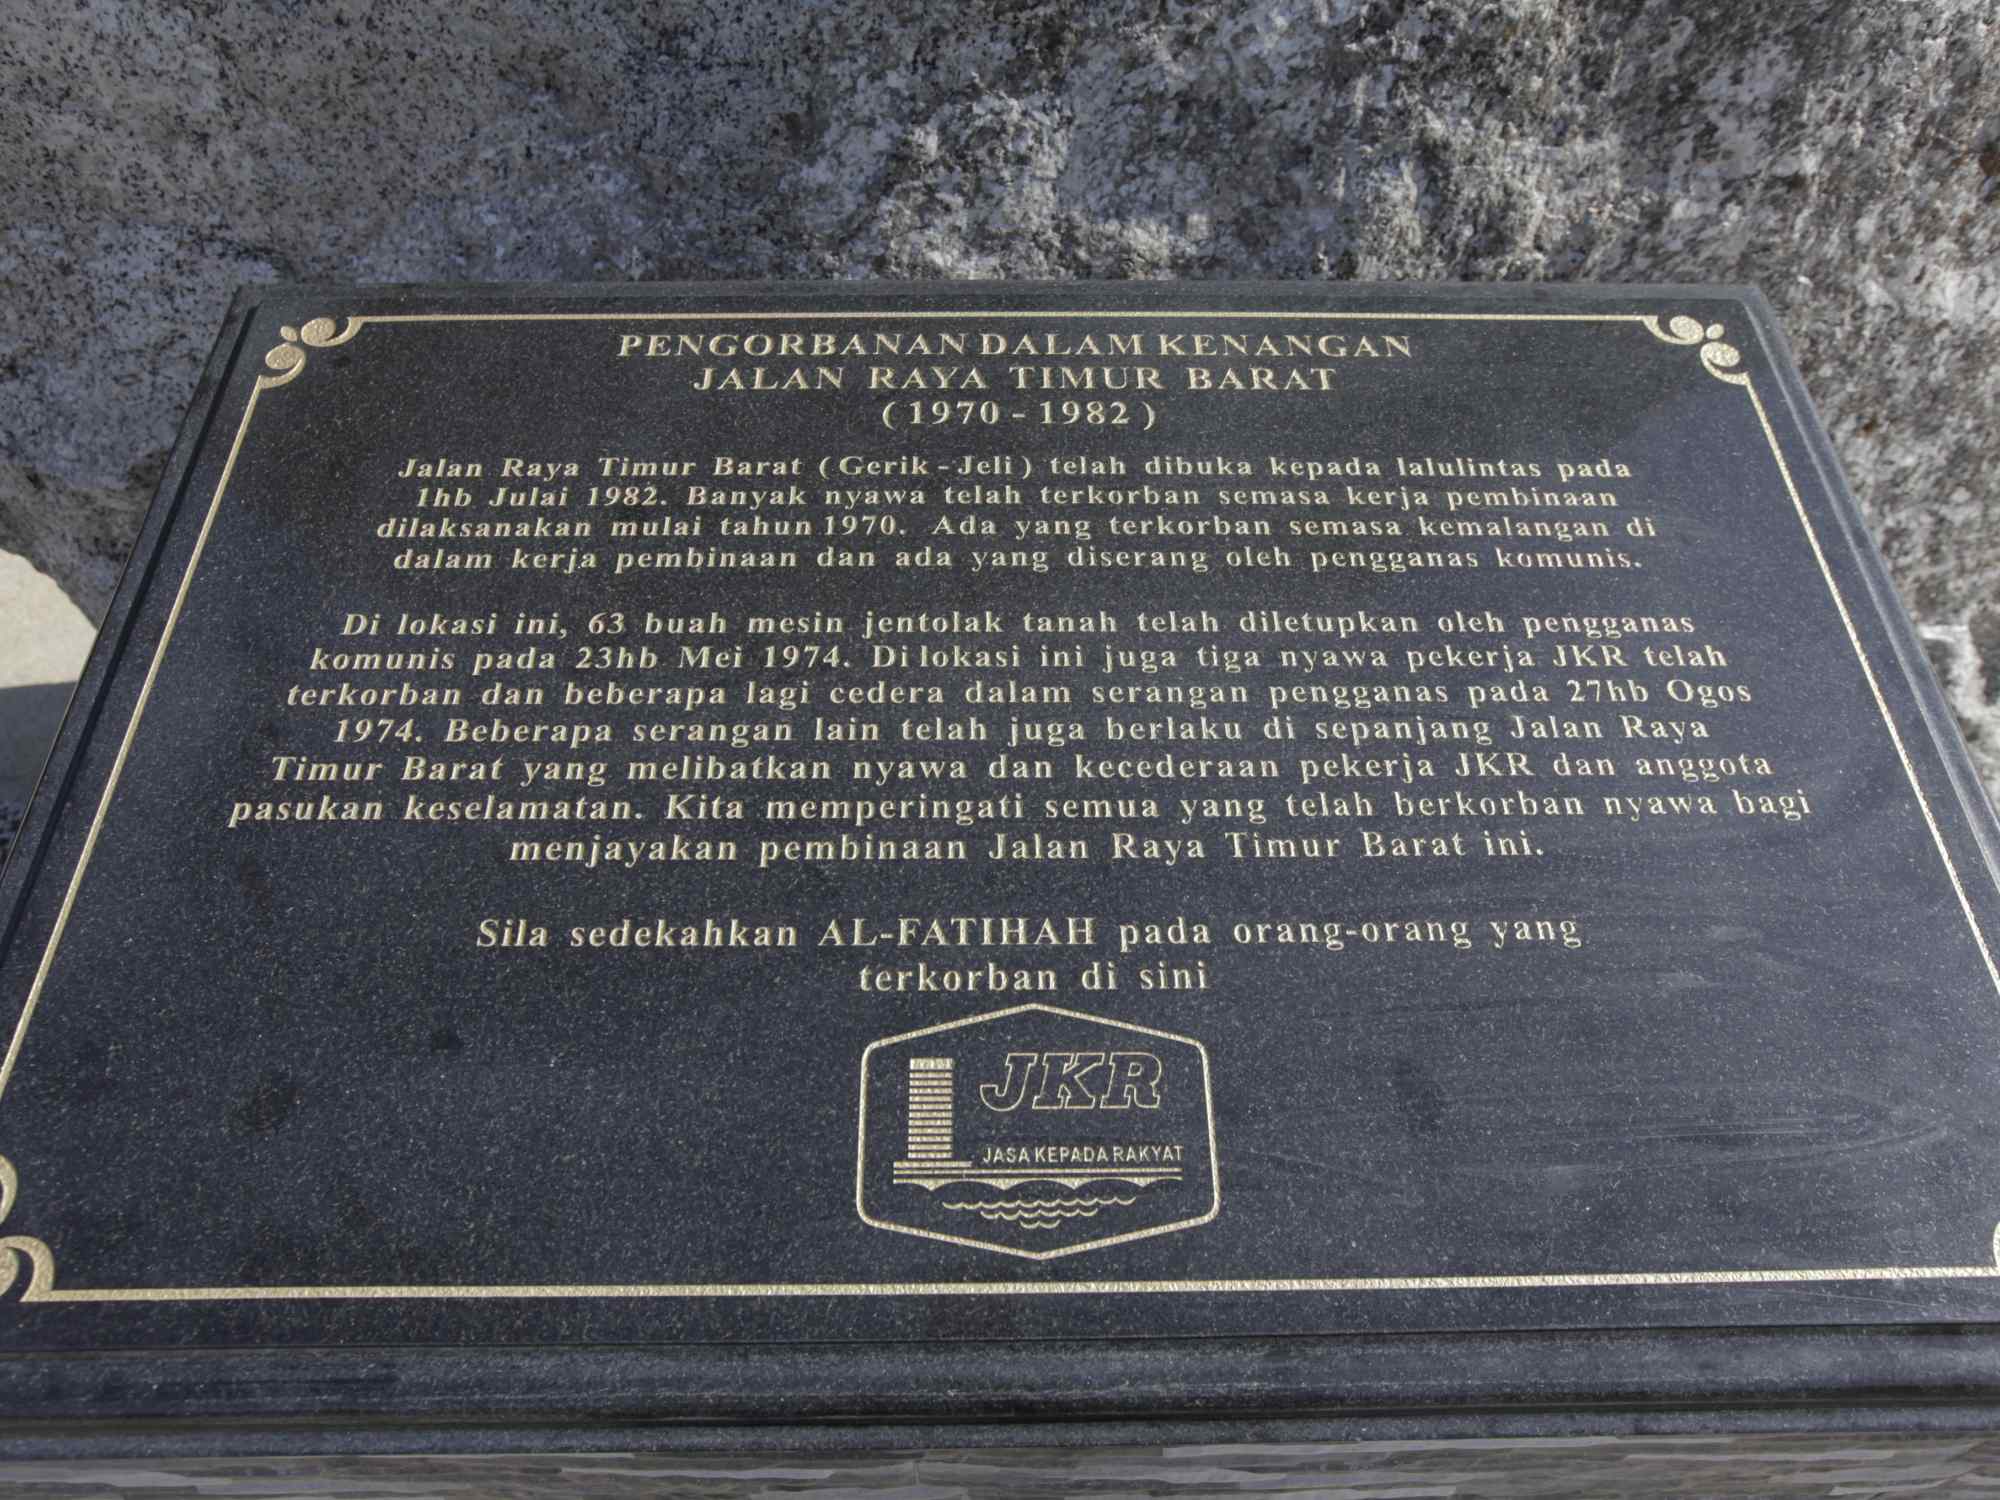 A close up of the text on the JKR monument. Img from the Ministry of Road Works' website.